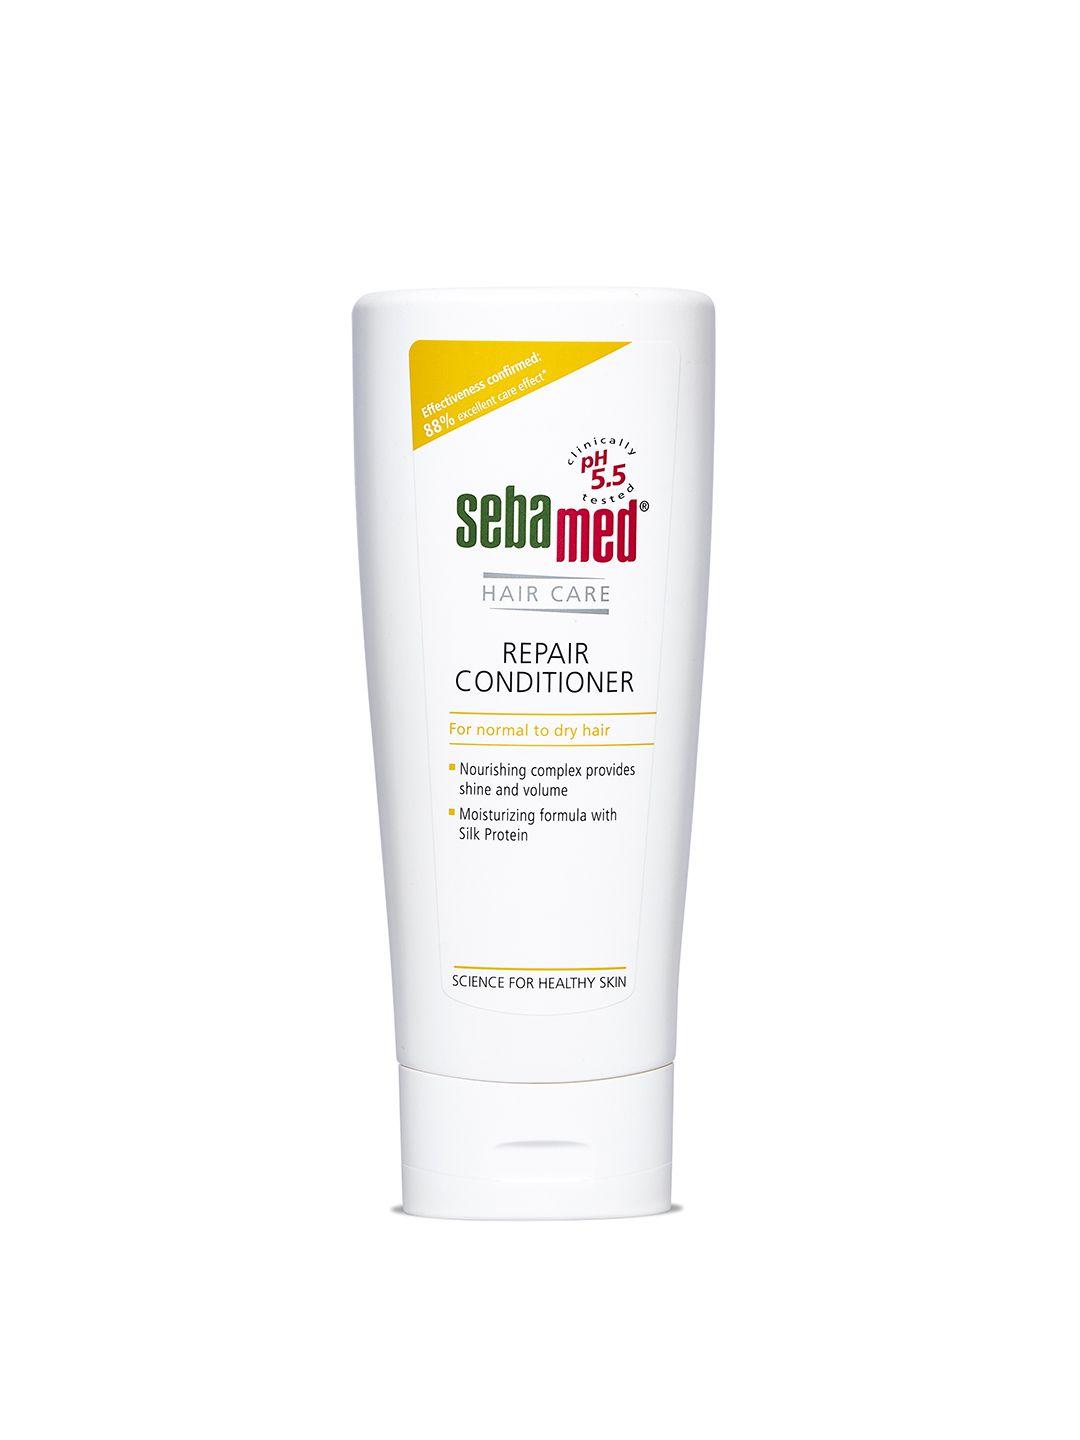 Sebamed Hair Care Repair Conditioner for Dry Hair with Silk Protein - 200ml